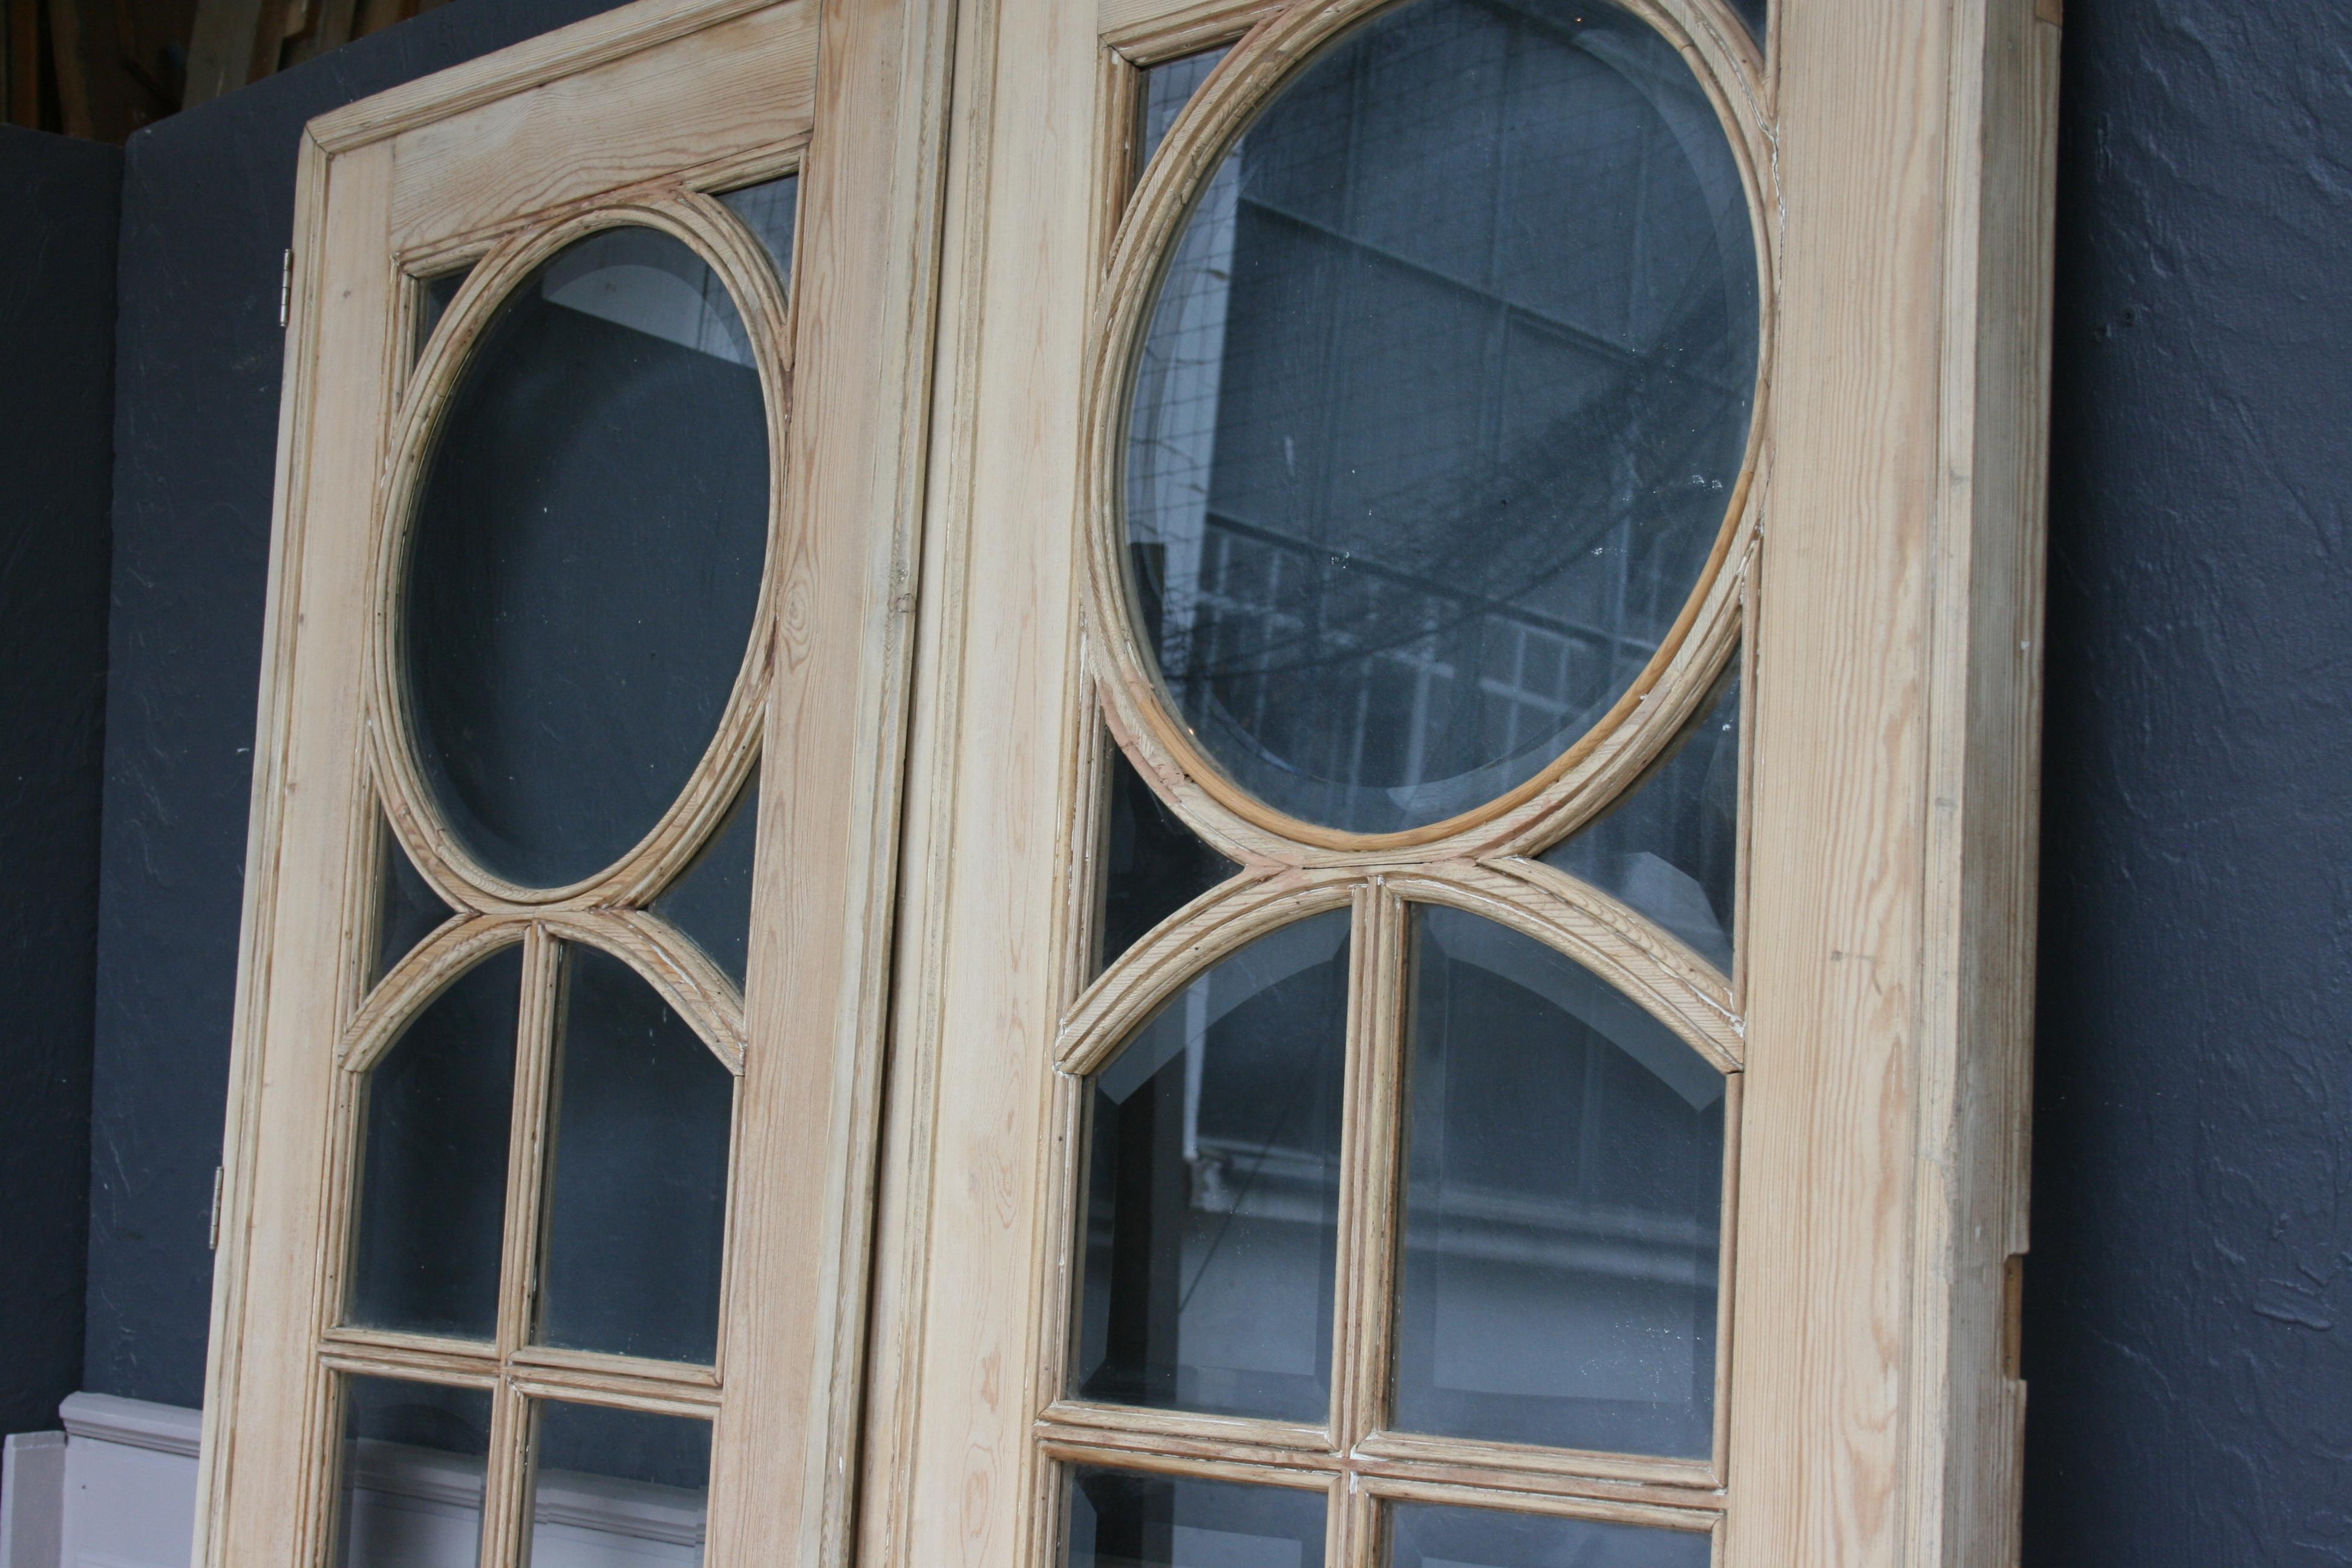 Cut Glass Pair of French Pine Doors with Beveled Glass, Art Deco, circa 1920s